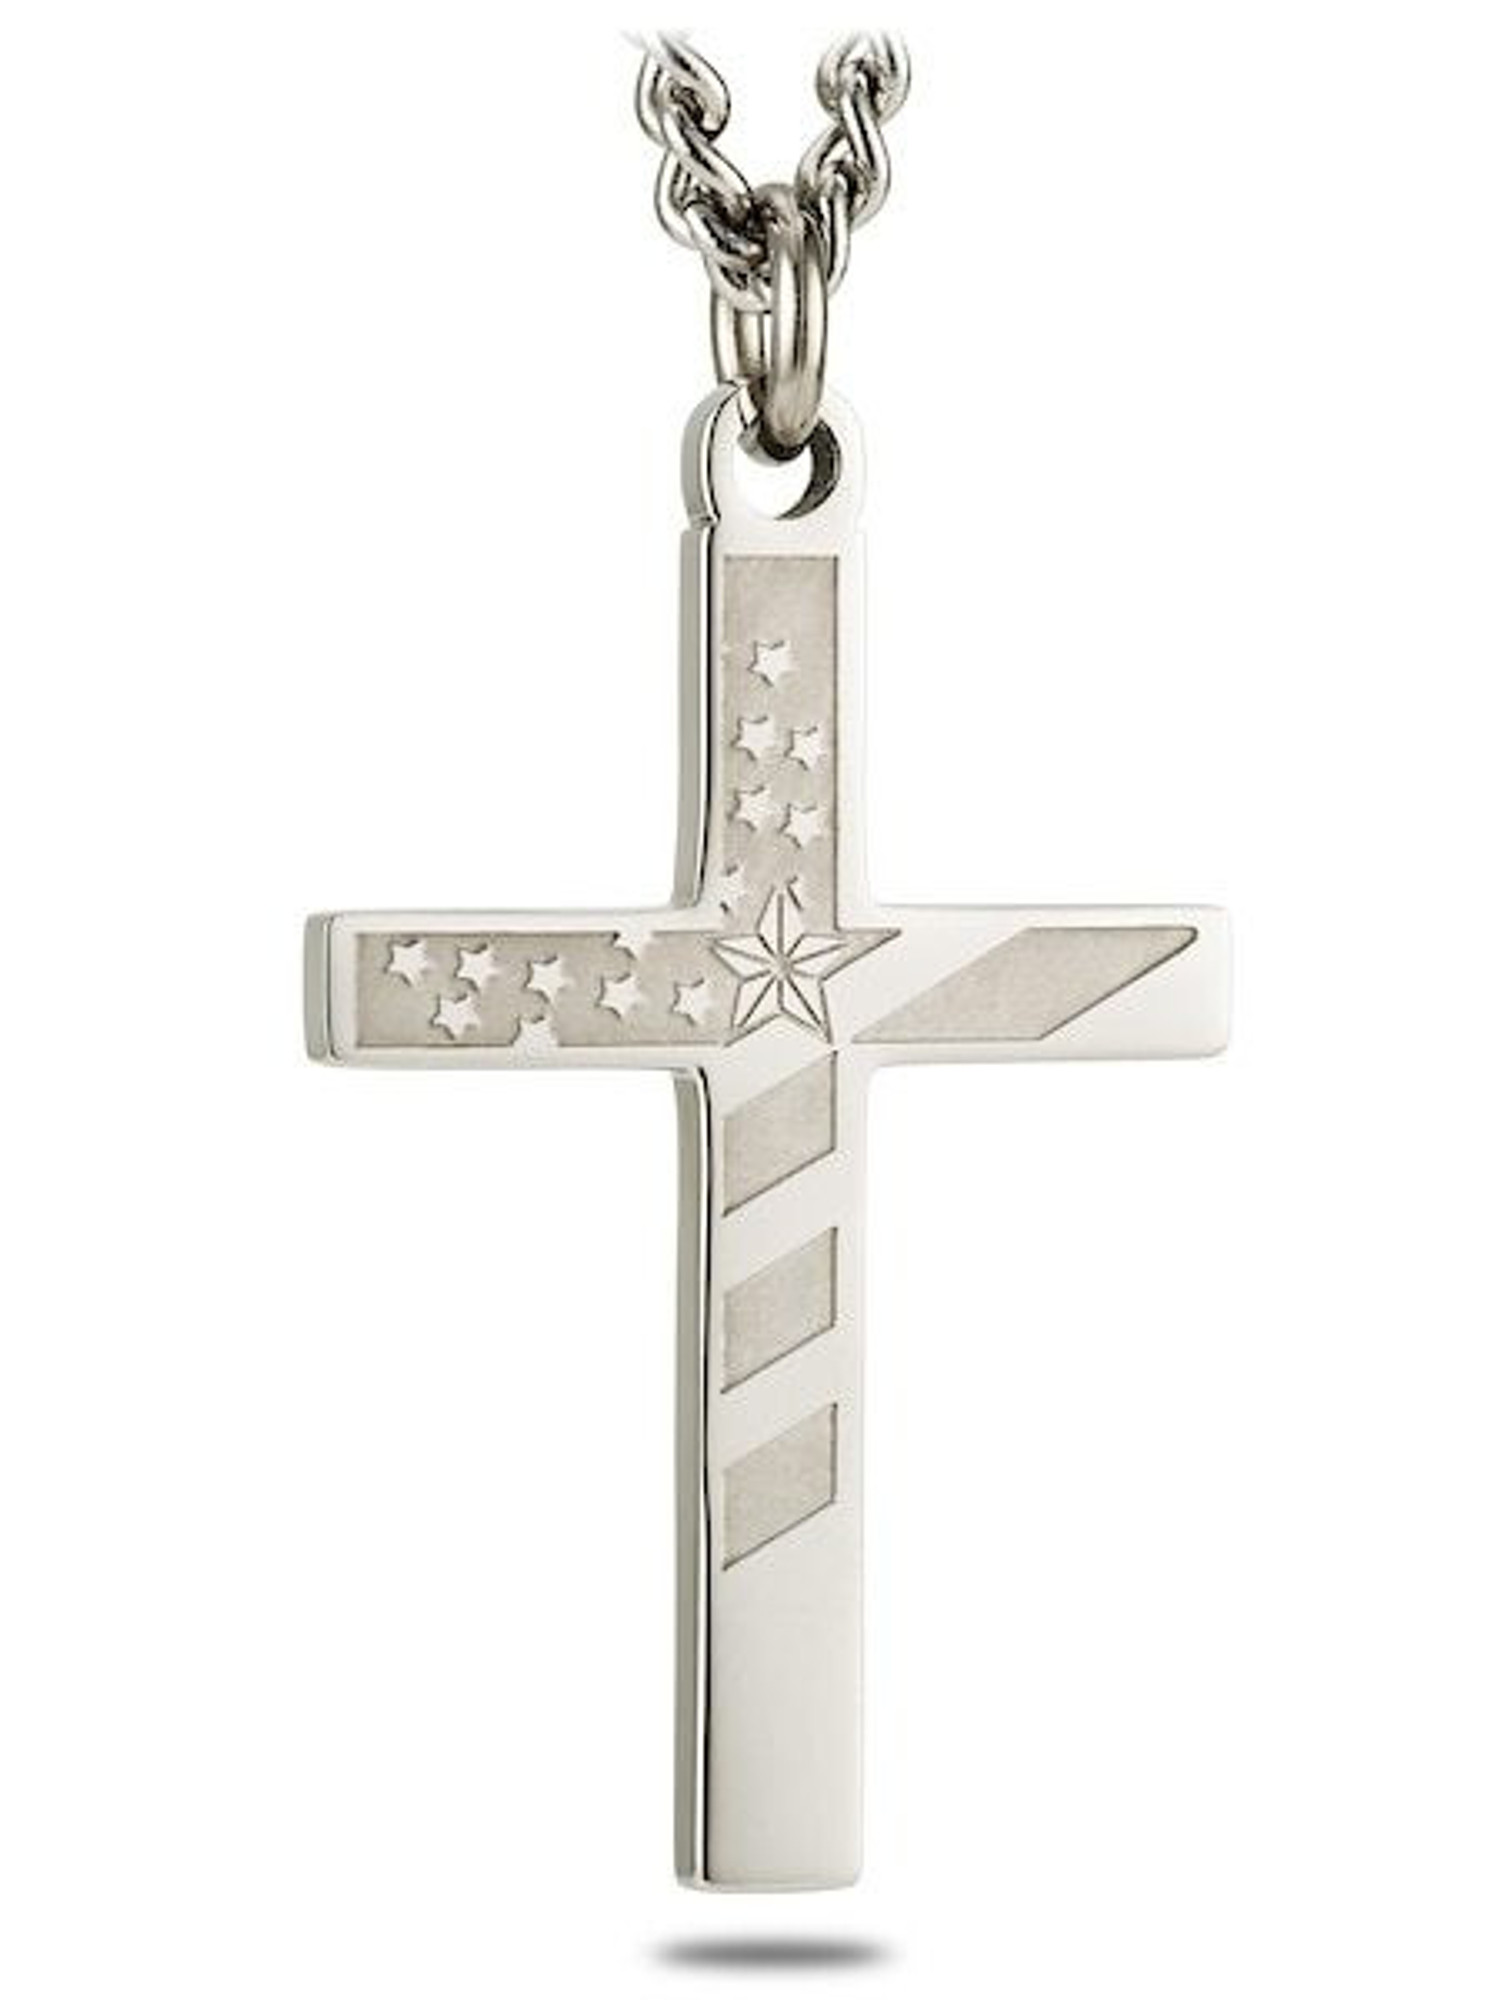 Niche Design Titanium Steel Dove Cross Gothic Cross Necklace Retro Pendant  For Men And Women, Hip Hop Fashion Jewelry Gift From Dingding64985, $21.11  | DHgate.Com